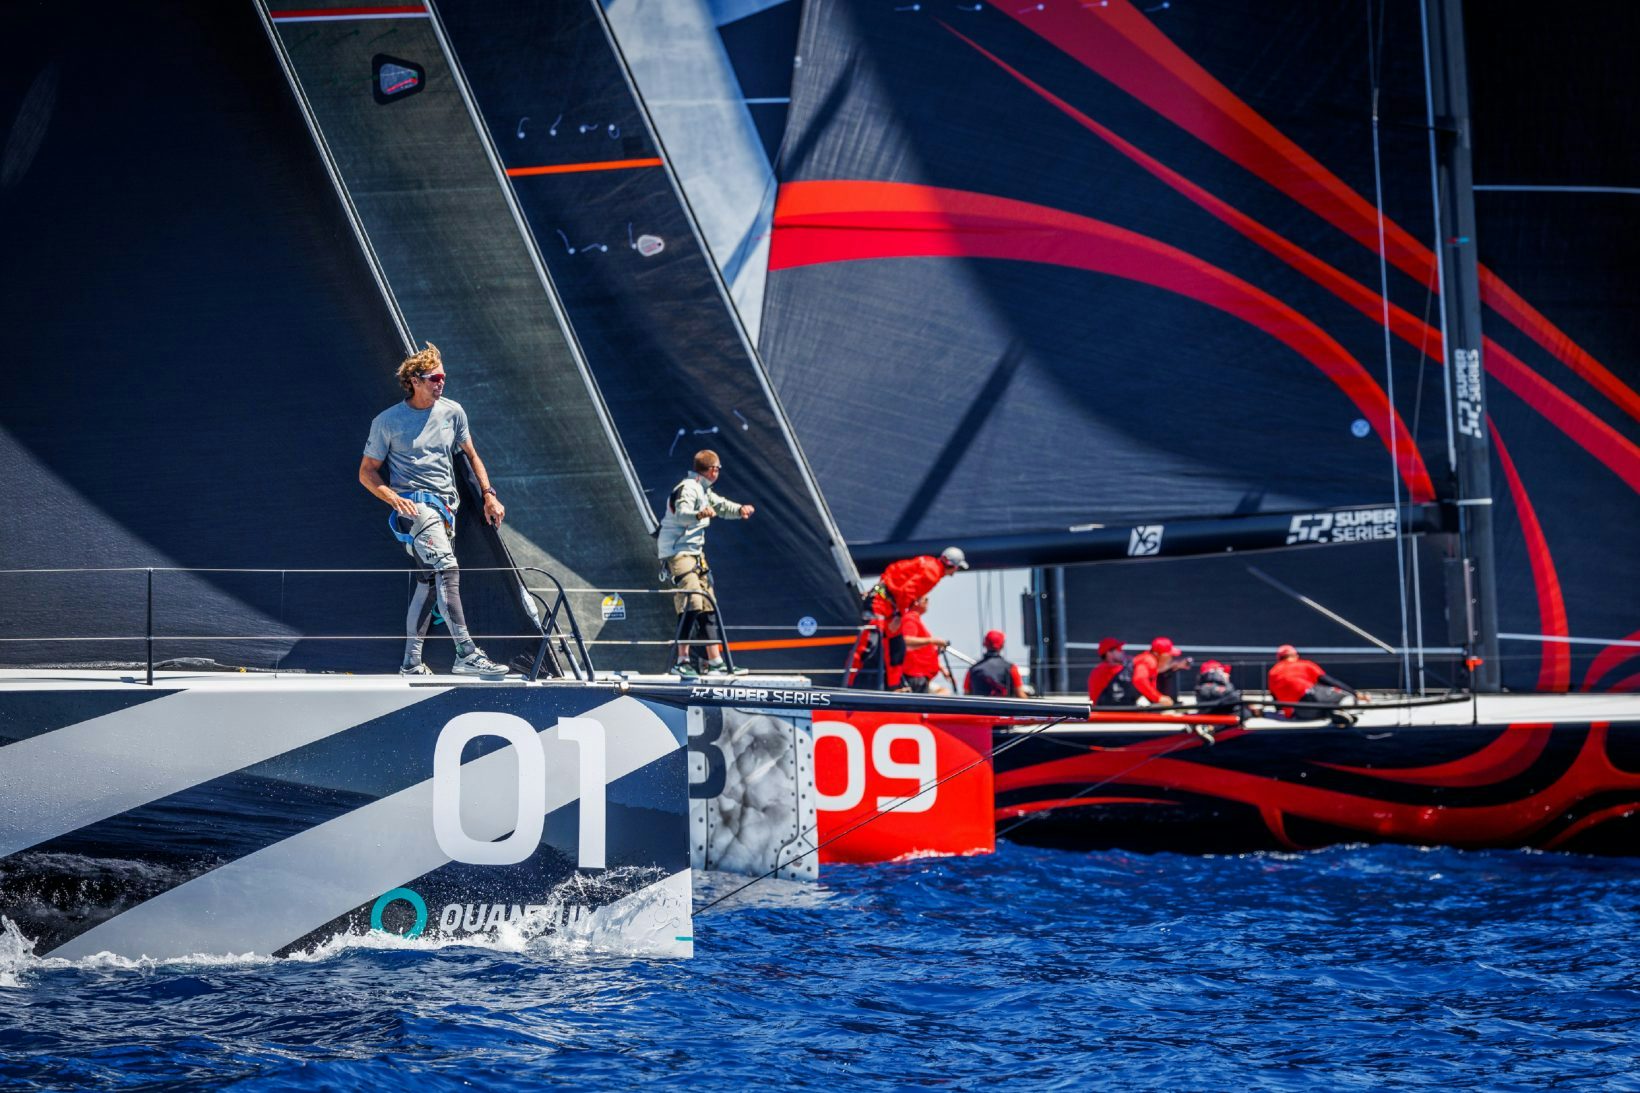 “In the world of sailing, if you strive to be the best, the 52 SUPER SERIES class can offer it”